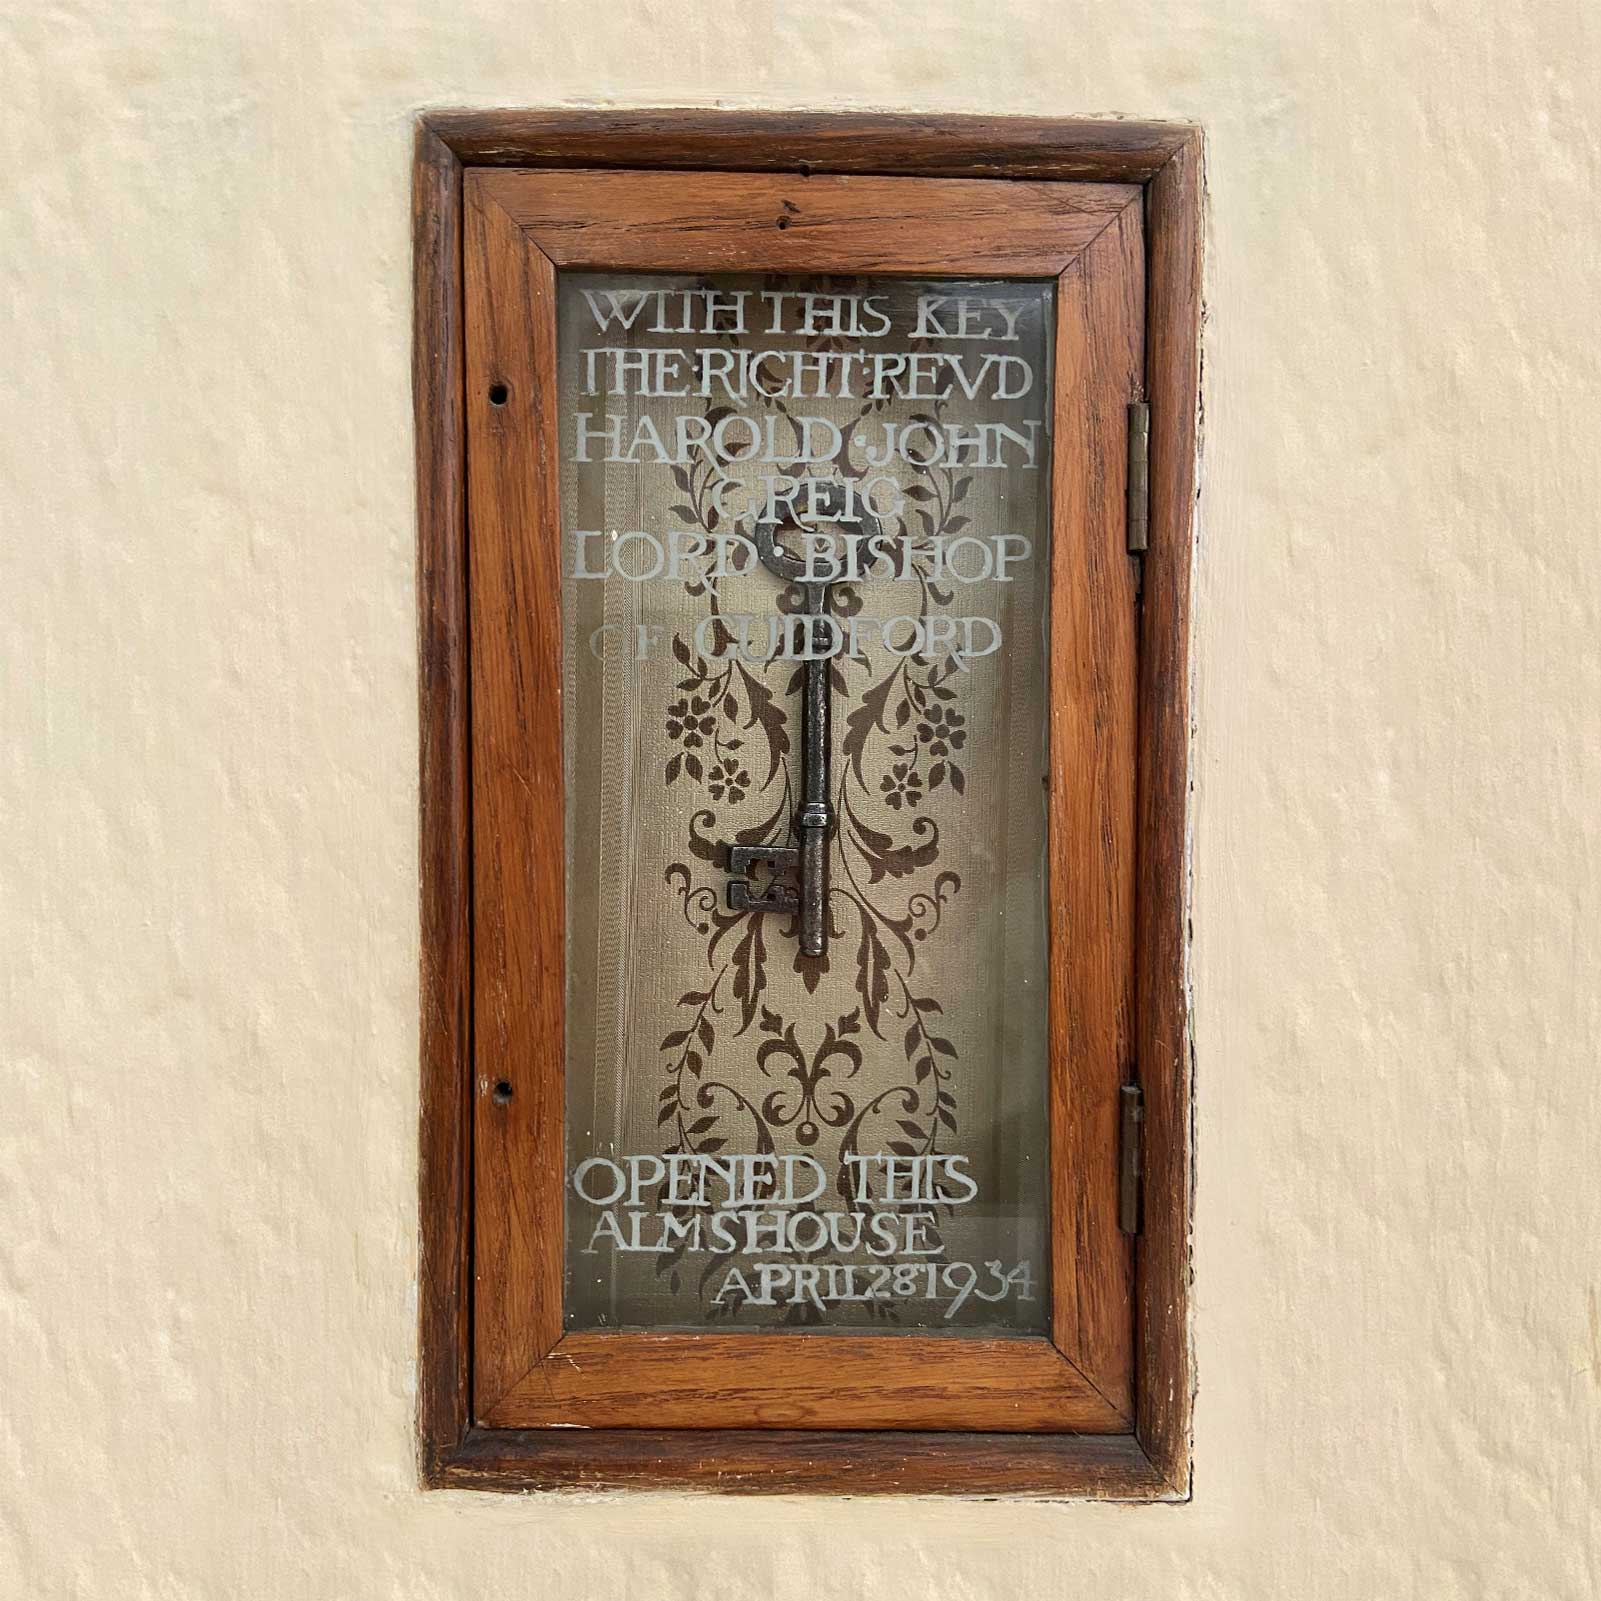 Old key in presentation glass wood framed glass case with etched writing